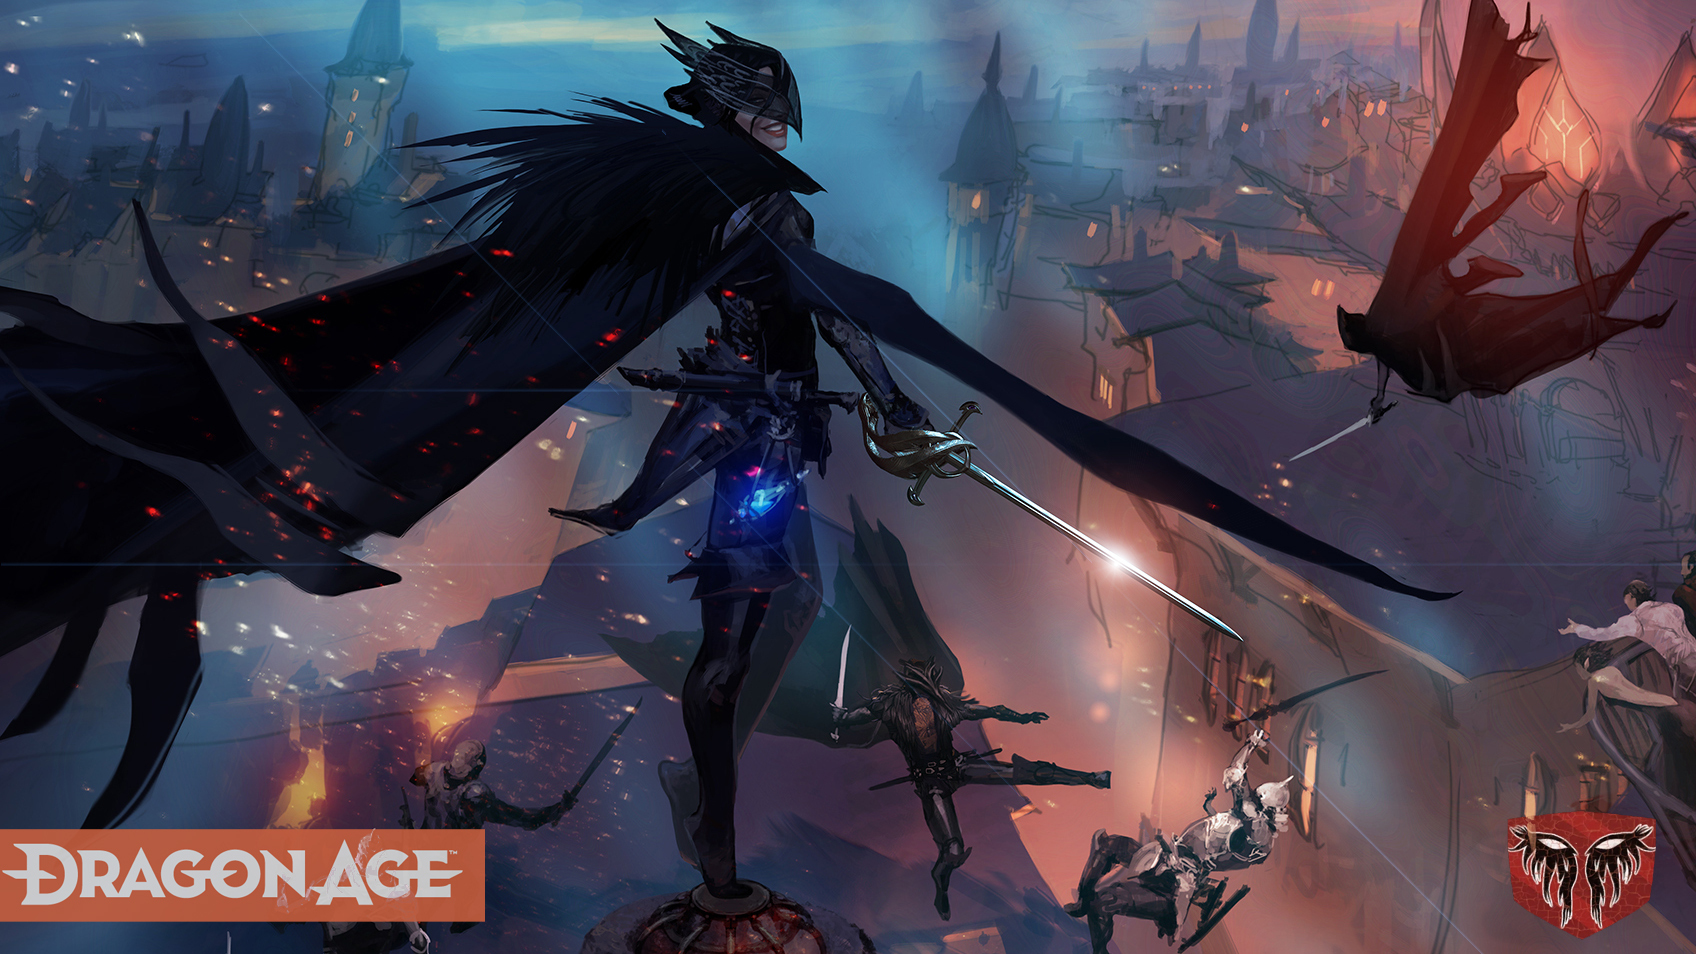 Concept art of Dragon Age 4, showing an antivan crow brandishing a rapier on a rooftop